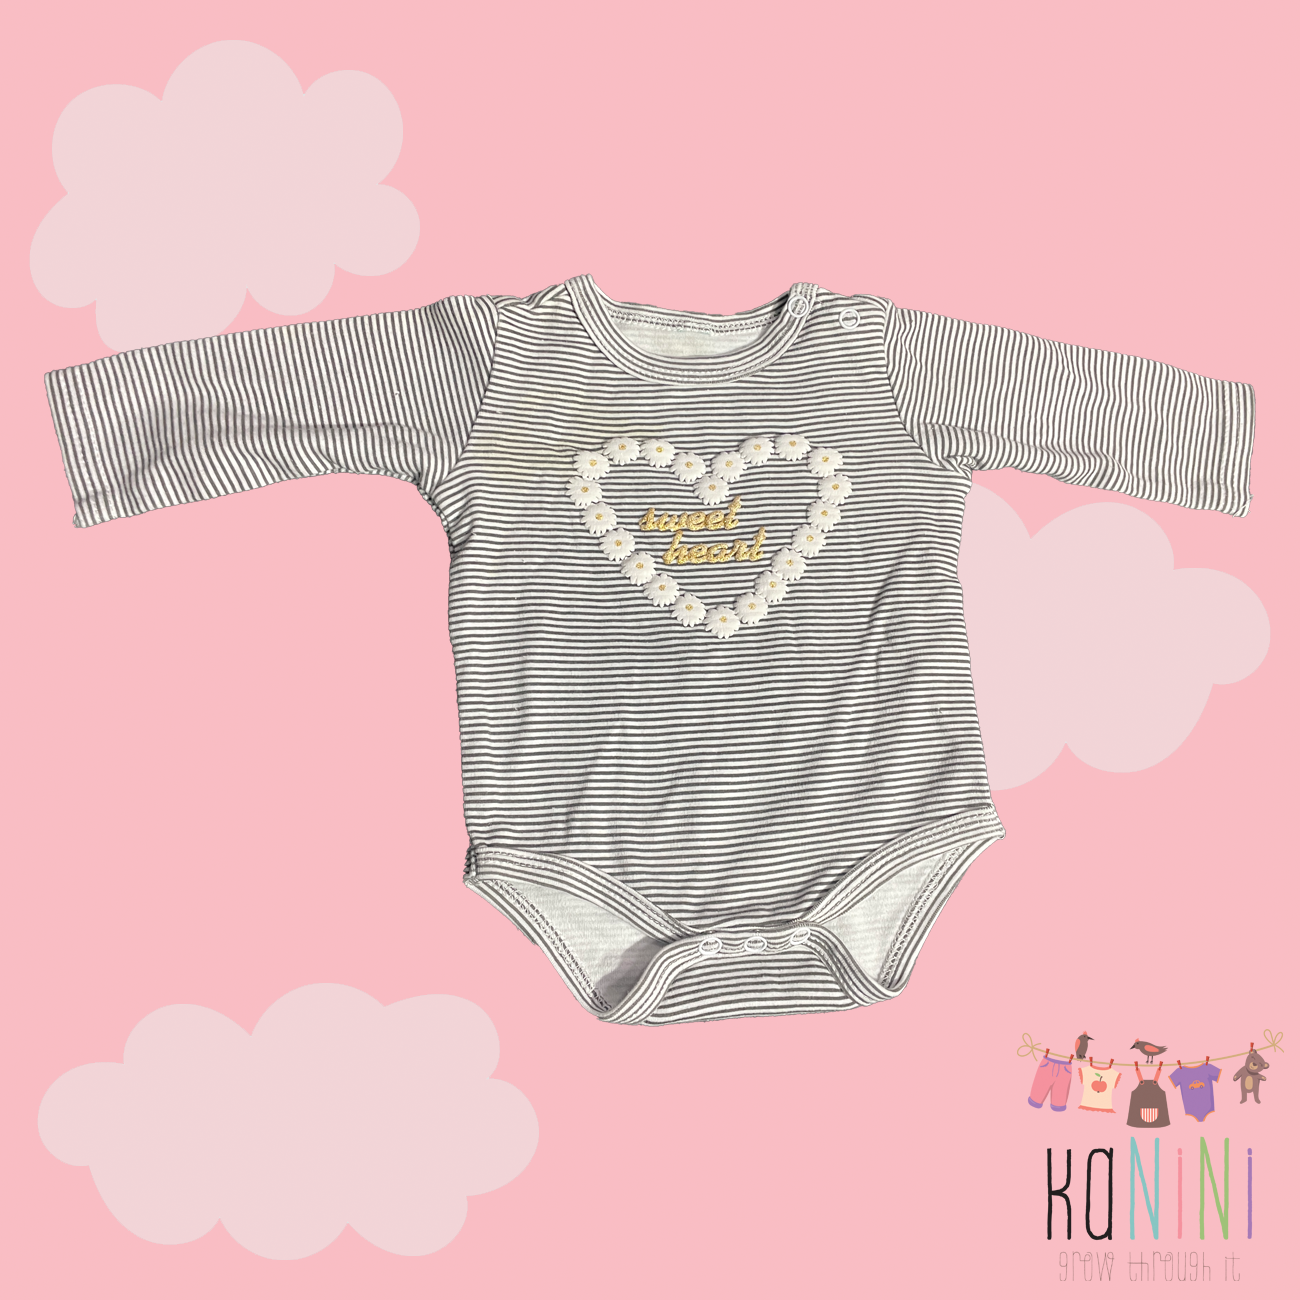 Featured image for “No Label ± 0 - 3 Months Girls Romper”